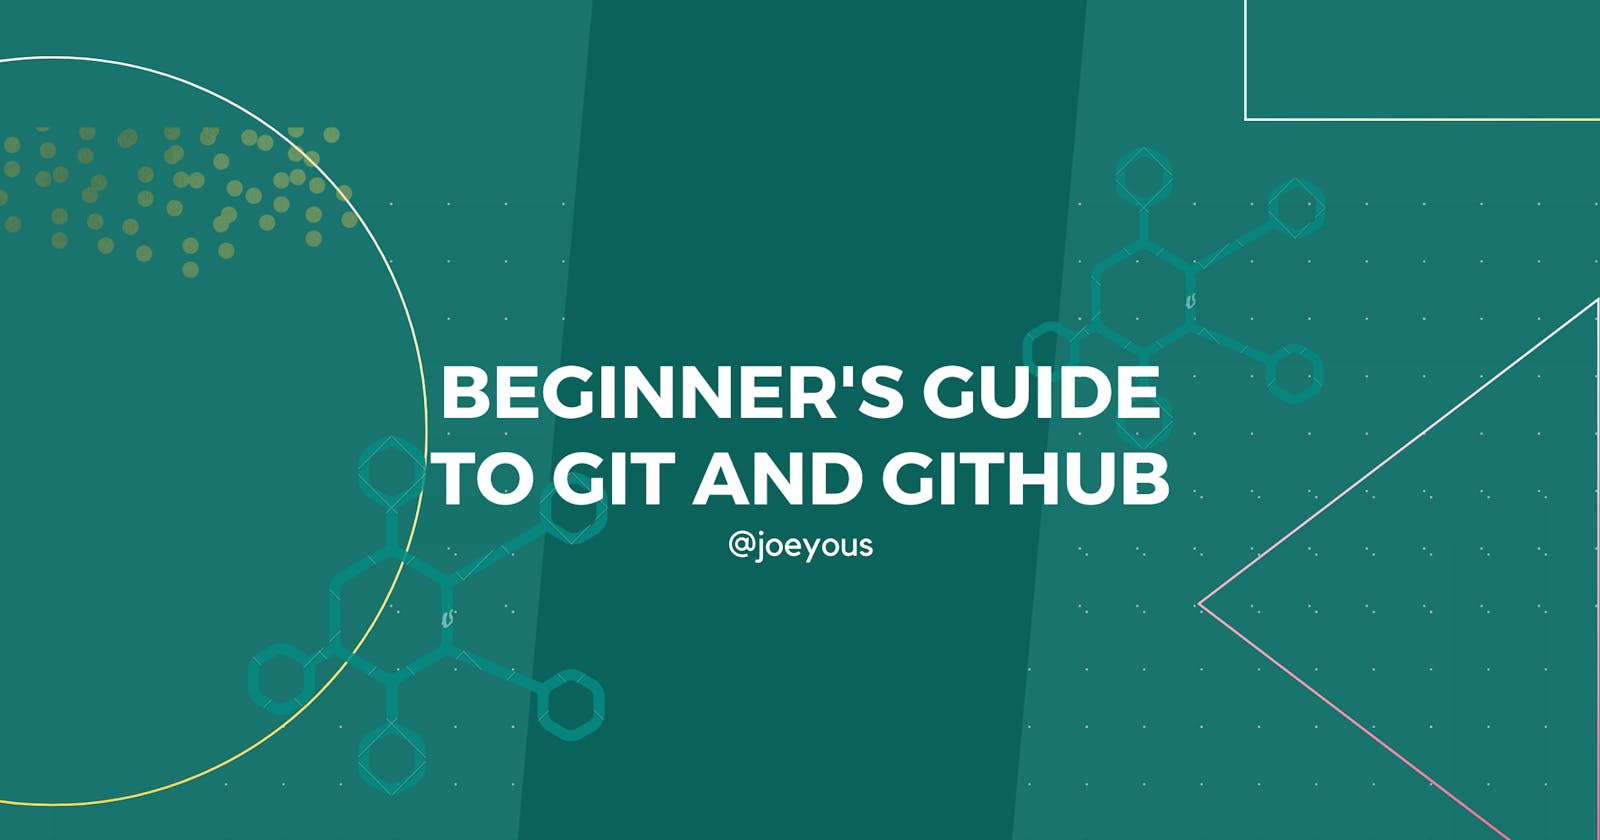 A Beginner’s Guide To Git And Github